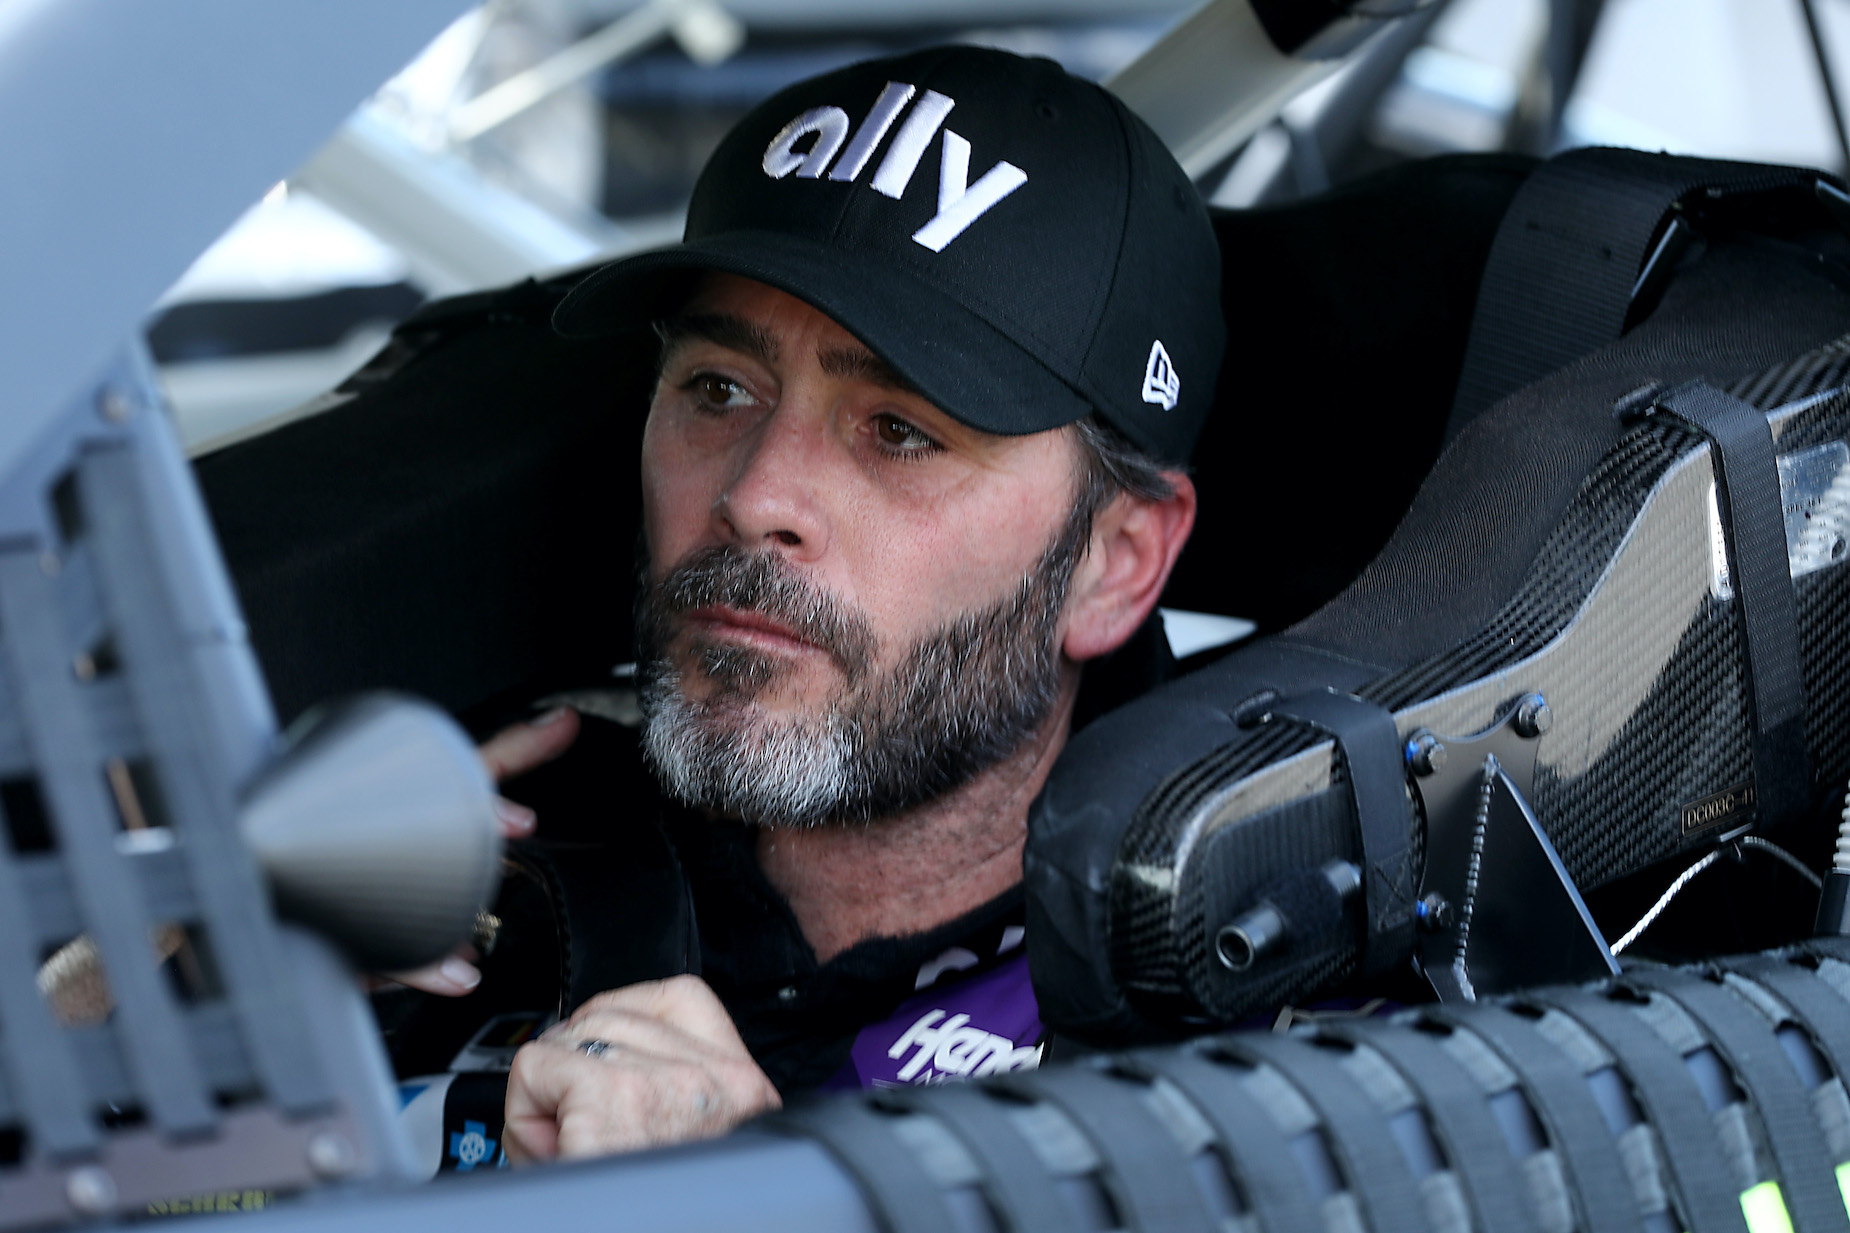 NASCAR driver Jimmie Johnson sits in the driver's seat